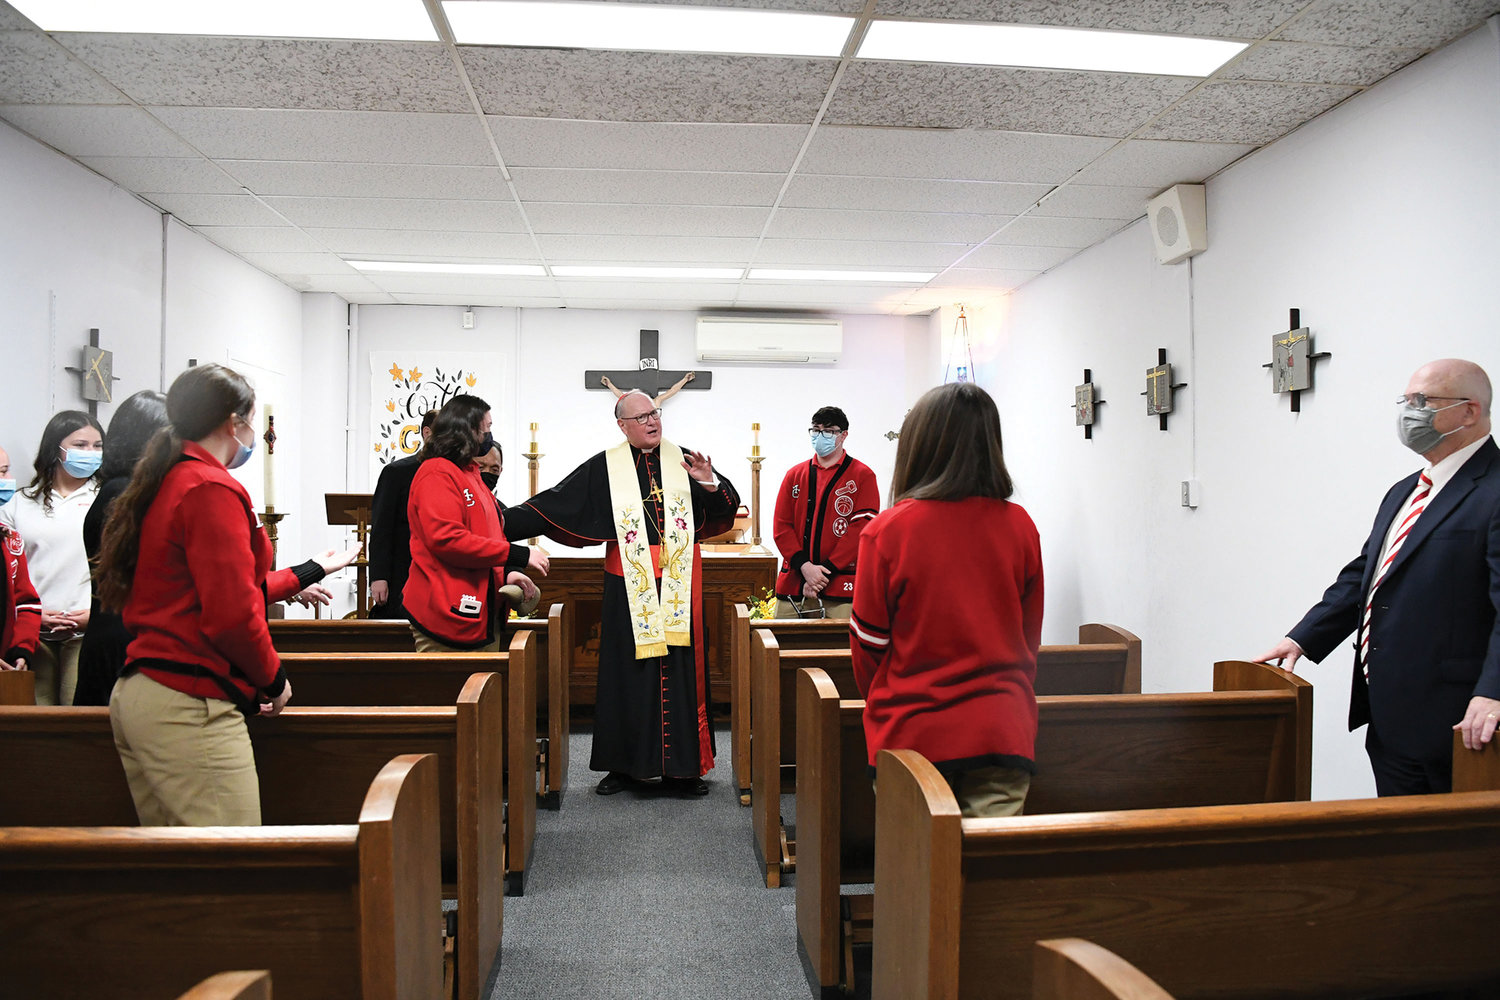 Cardinal Dolan converses with students in the newly refurbished chapel at Moore Catholic High School on Staten Island which he blessed May 17. Michael Deegan, superintendent of schools for the archdiocese, is at far right.